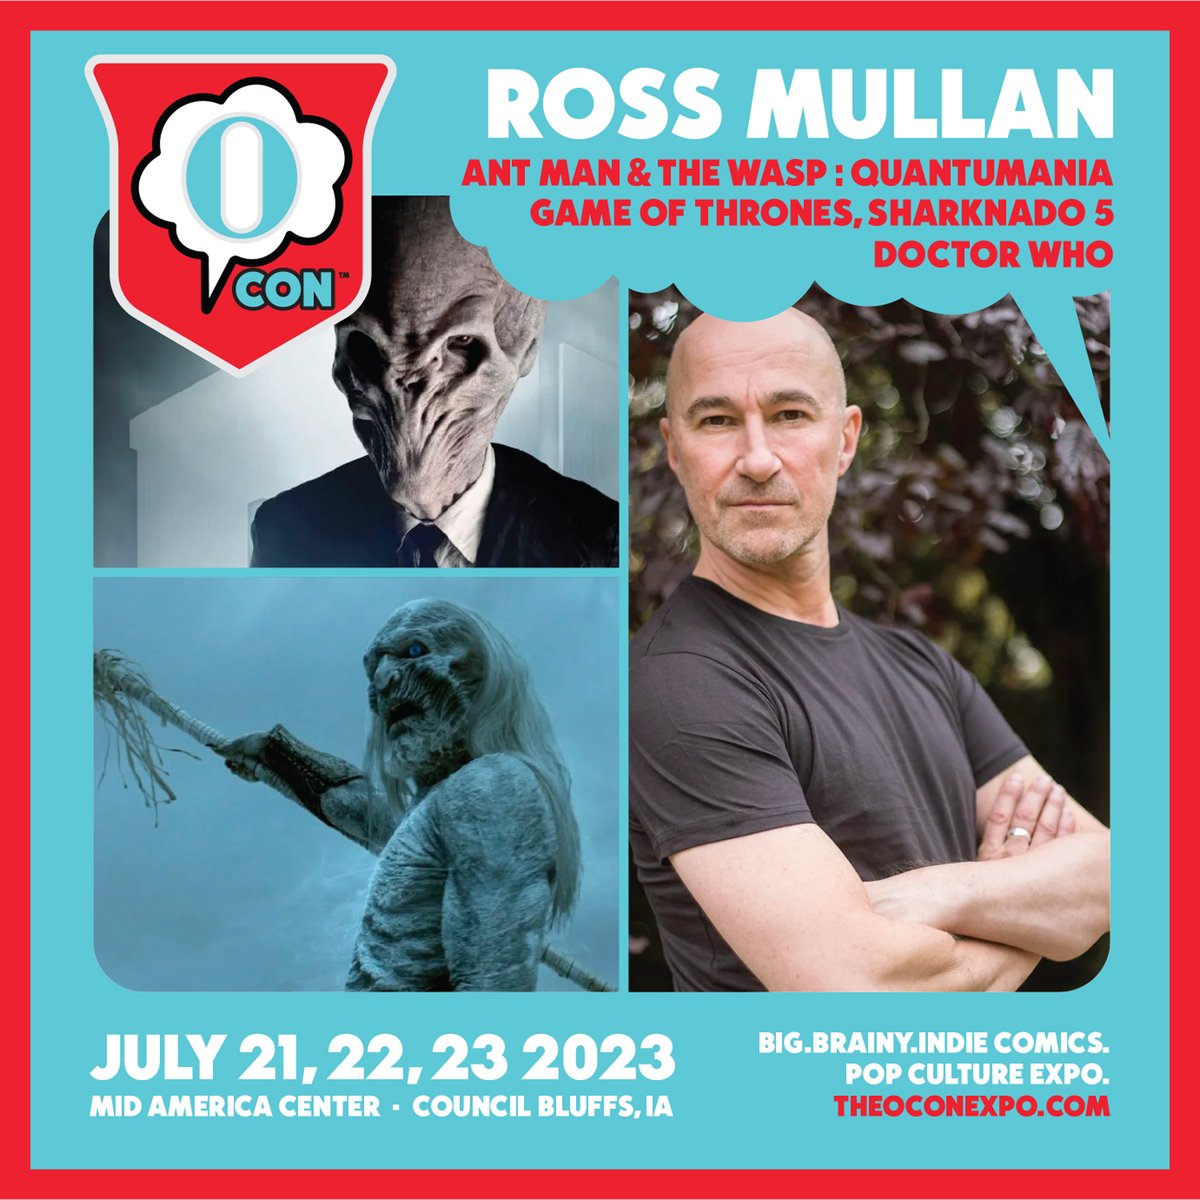 We are thrilled to announce that Ross Mullan will be joining us as a special guest at OCon Expo (July 21, 22, & 23, at the Mid-America Center)!

Get your passes: theoconexpo.com/shop/

#OConExpo #Omaha #BackattheMac #VisitOmaha #OmahaWeekend